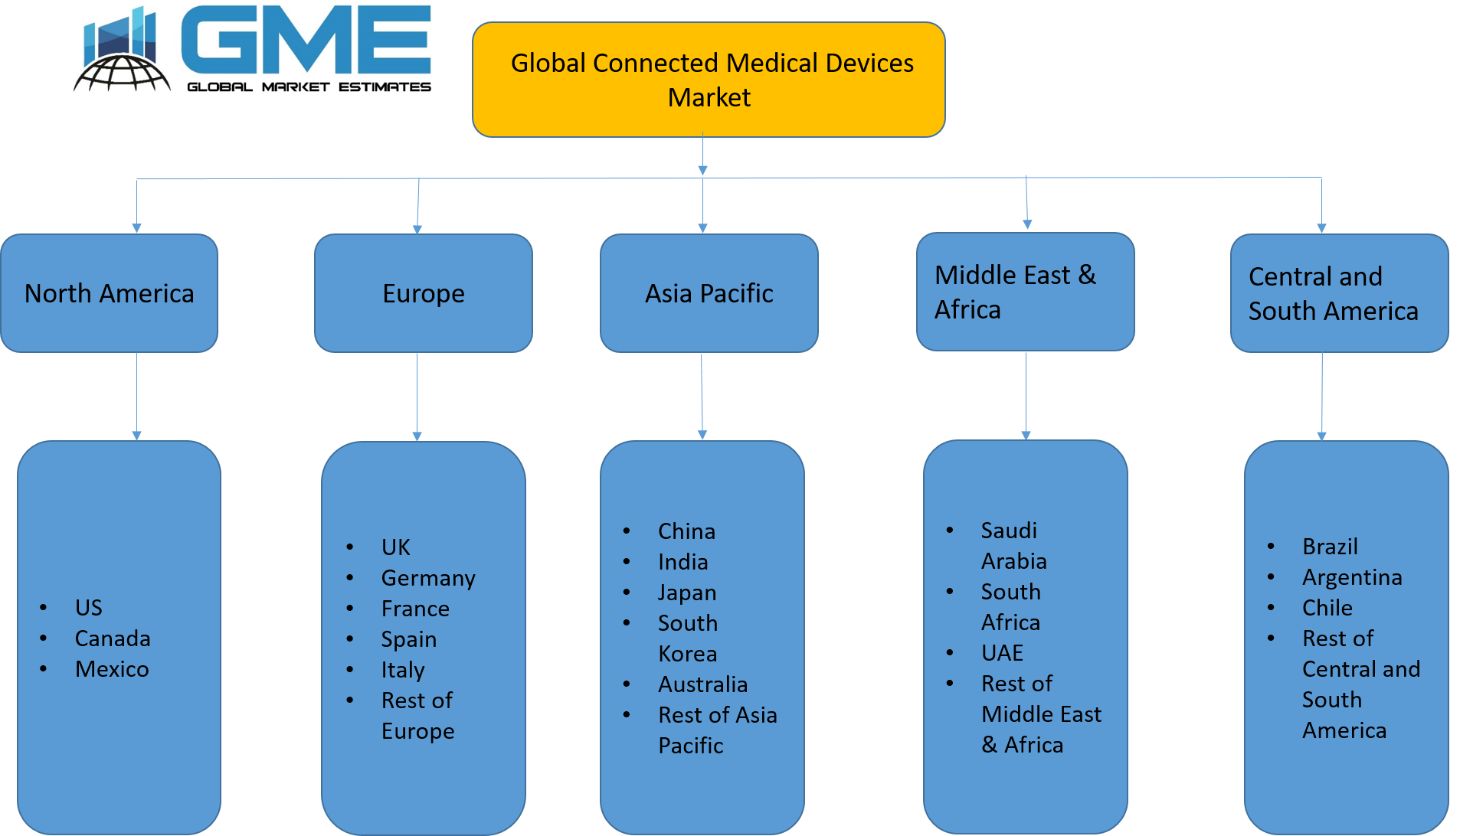 Connected Medical Devices Market - Regional Analysis